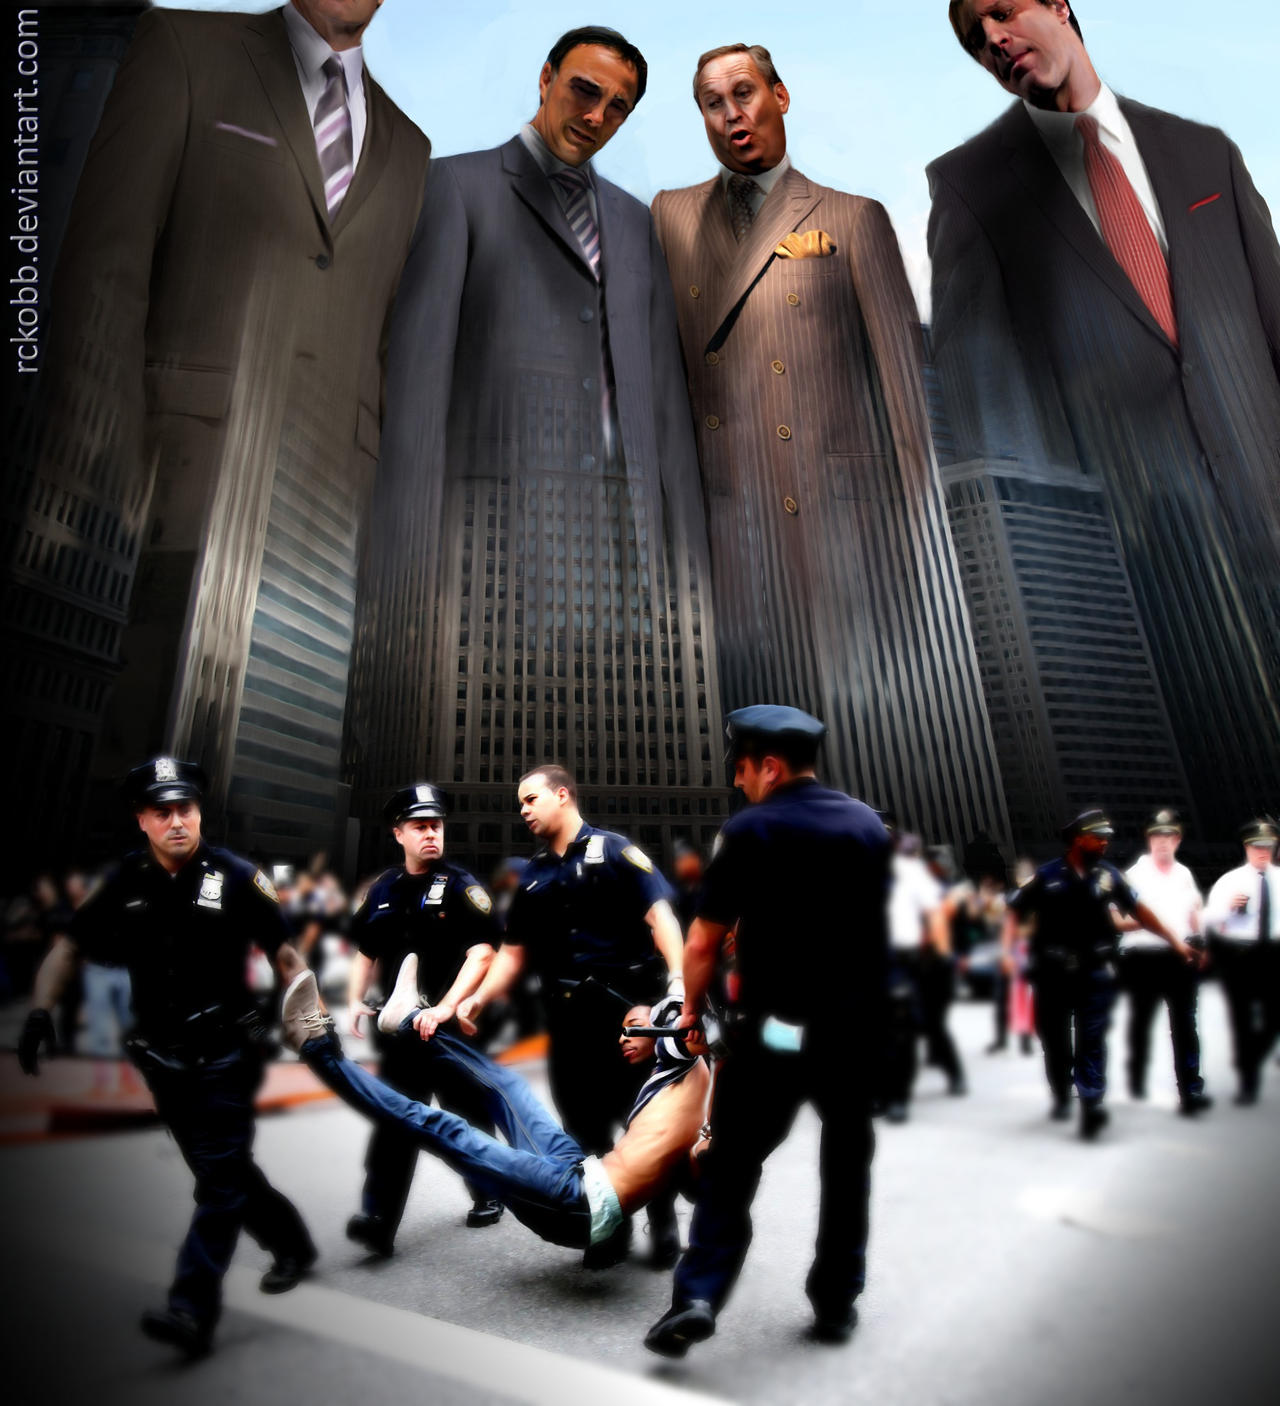 Corporate Takeover by rckobb on DeviantArt